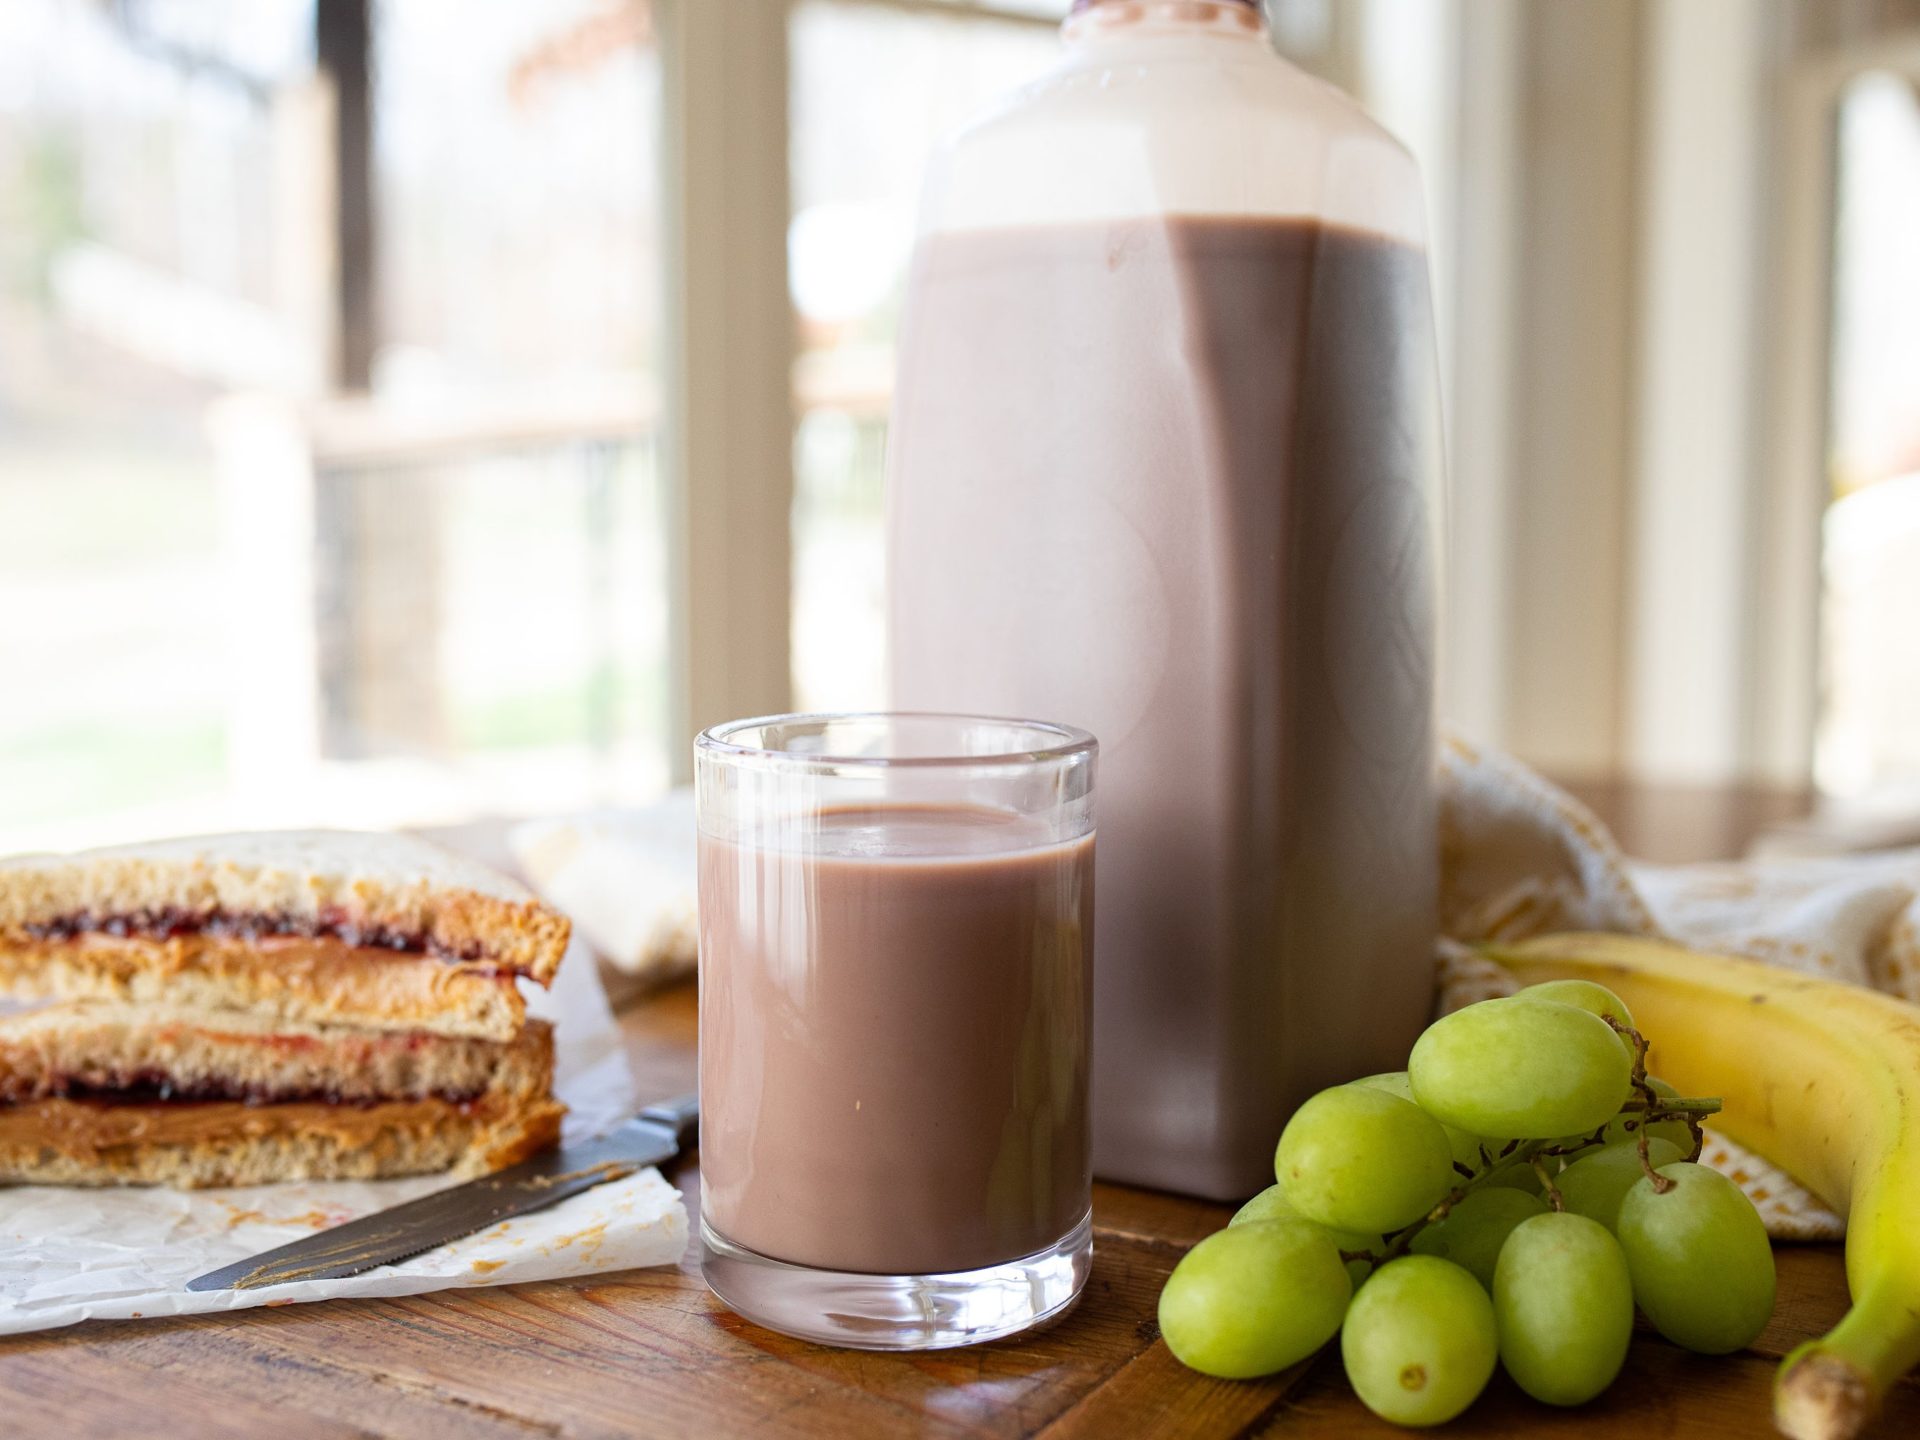 Get Half Gallons Of Kroger Chocolate Milk For Just $1.49